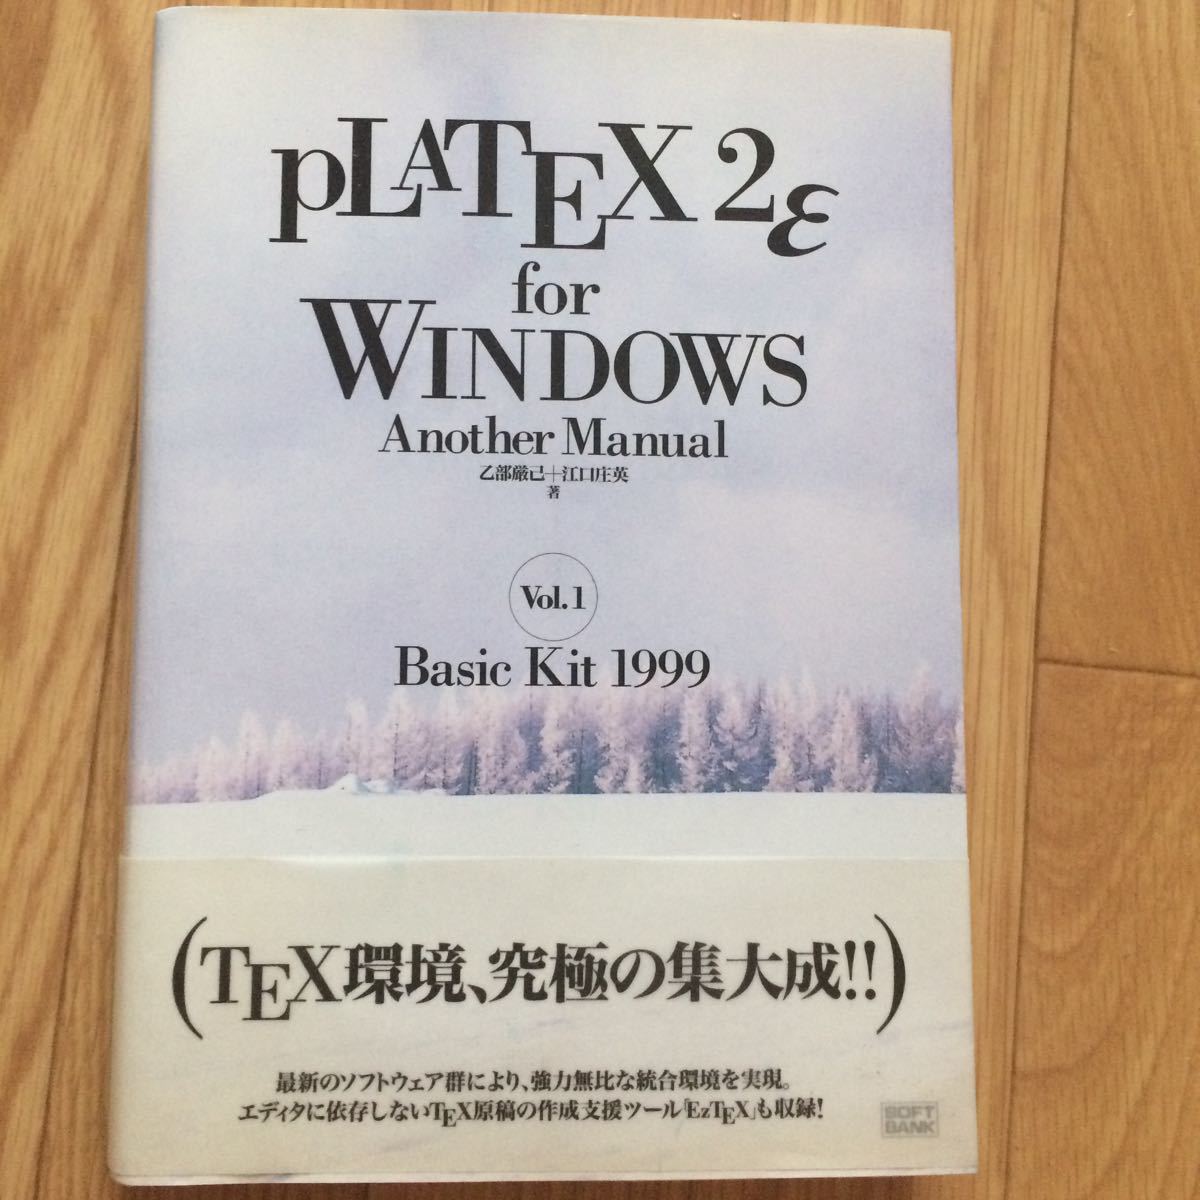 PLATEX 2ε for Windows Another Manual(Vol.1)Basic Kit 1999 the first version no. 1.. part ..,... britain work 